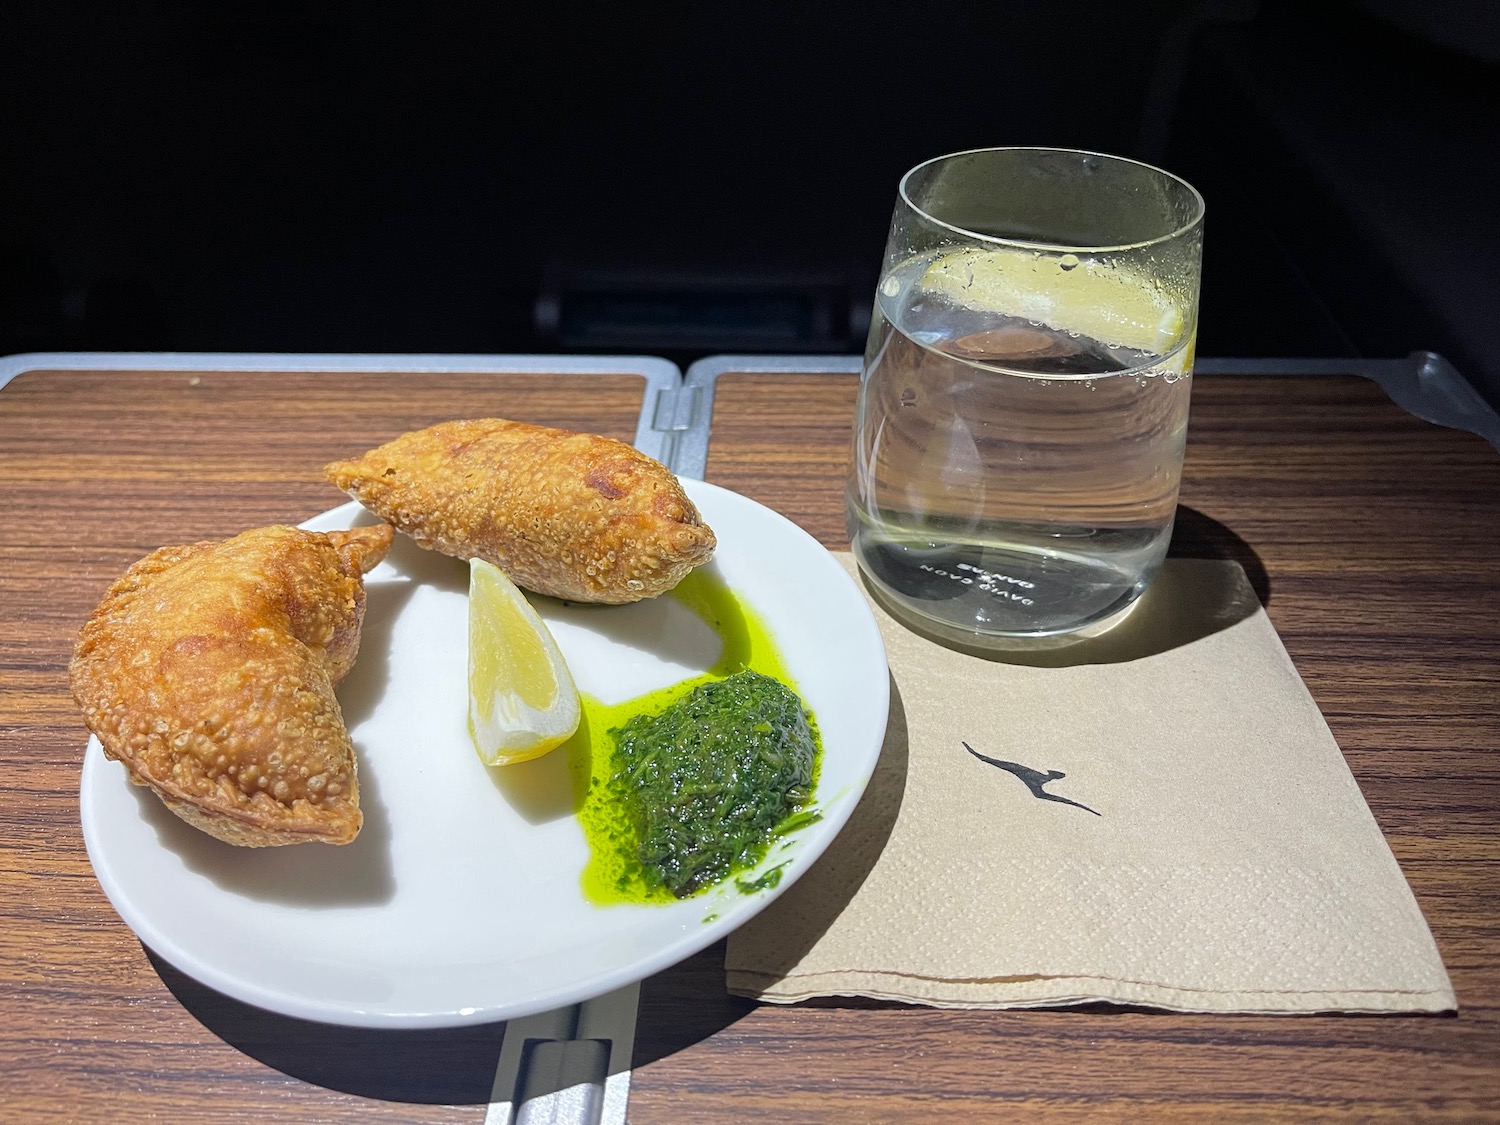 food on a plate next to a glass of water